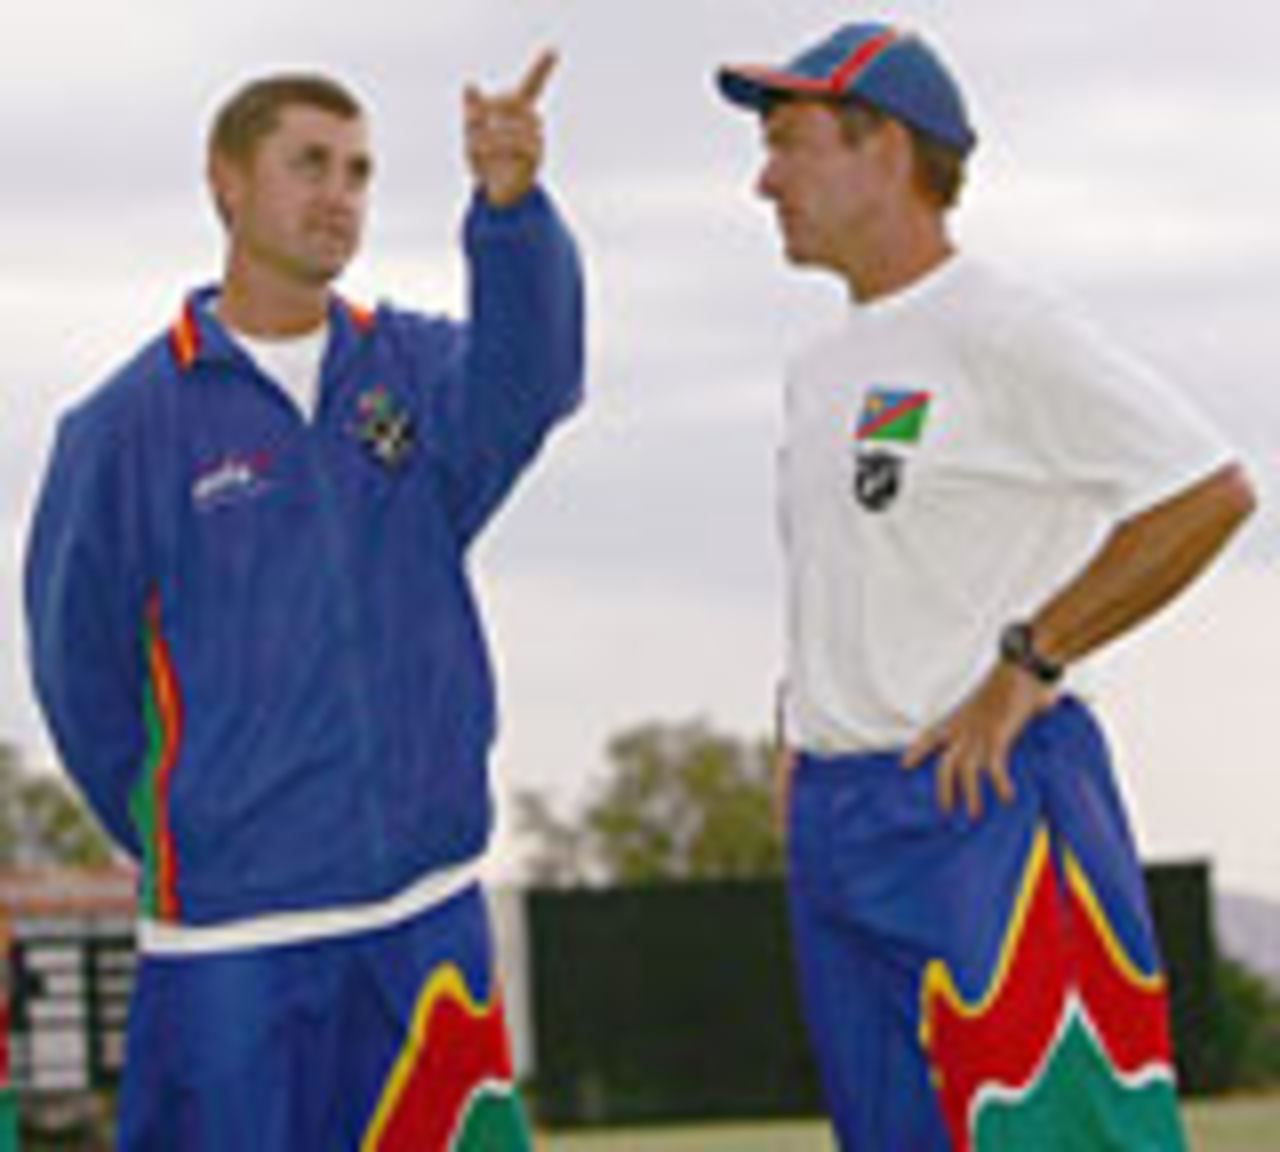 Andy Waller, Namibia's coach, chats with Deon Kotze, the captain, November 20, 2004